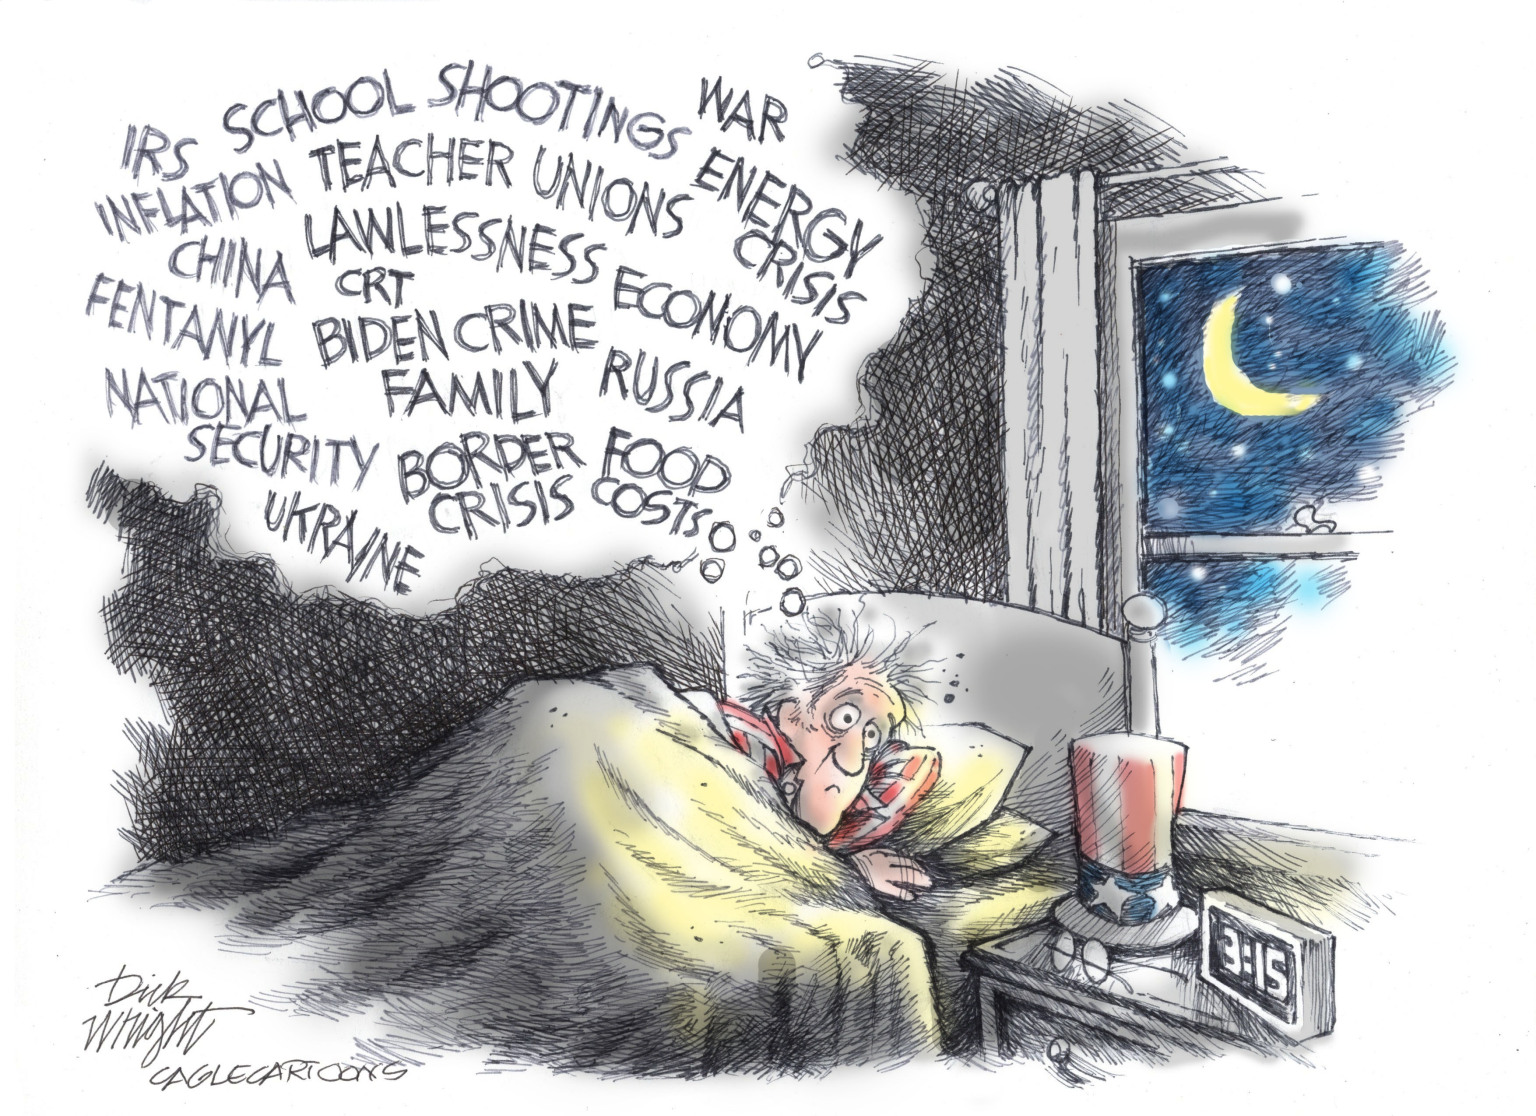 Uncle Sam Can't Sleep - By Dick Wright